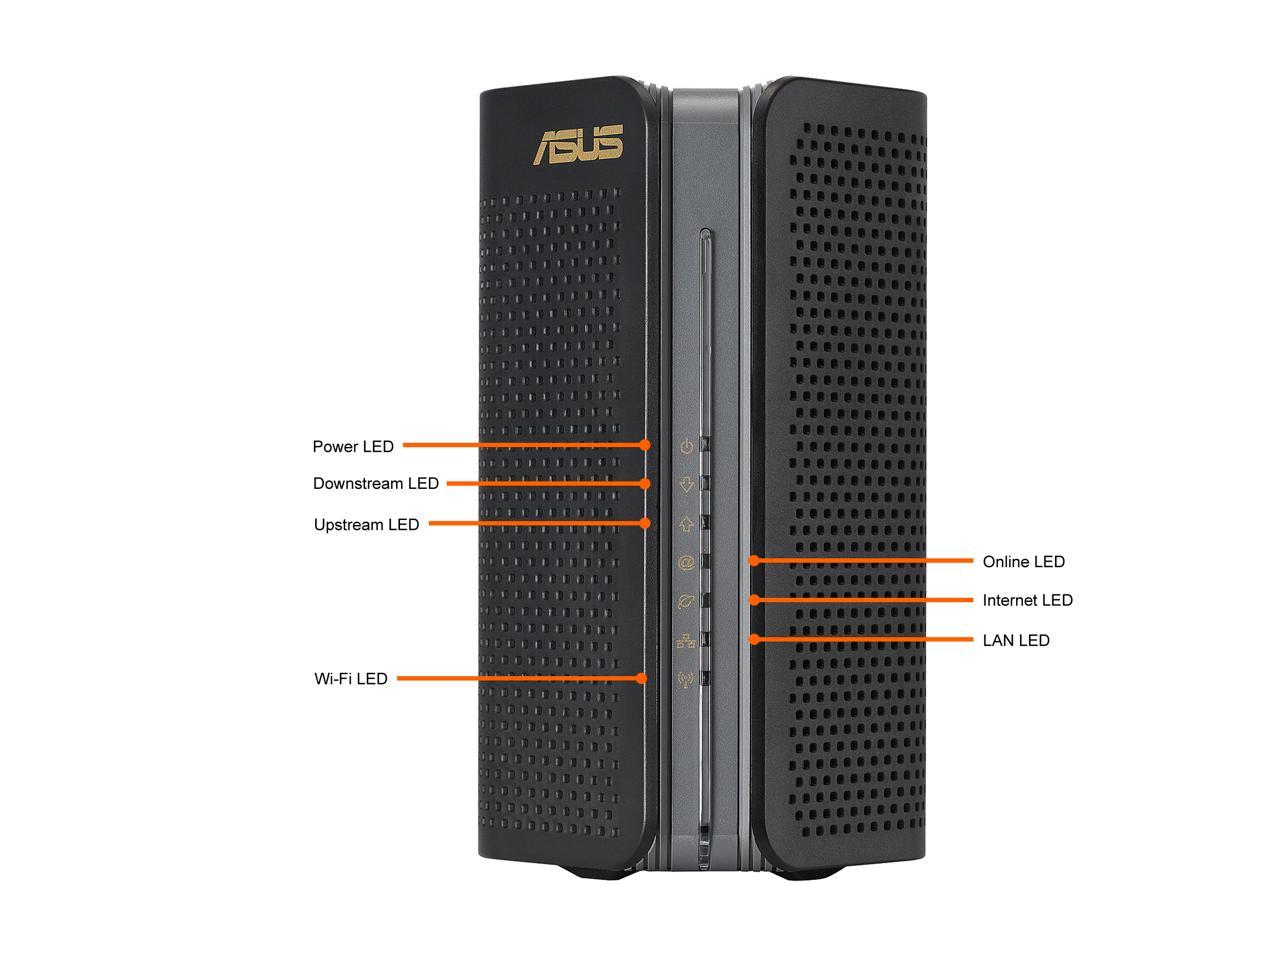 ASUS AX6000 WiFi 6 Cable Modem Wireless Router Combo (CM-AX6000) - Dual Band, DOCSIS 3.1, Gigabit Internet Support, Approved by Comcast Xfinity and Spectrum, 160MHz Bandwidth, 4K Video Playback, OFDMA, MU-MIMO